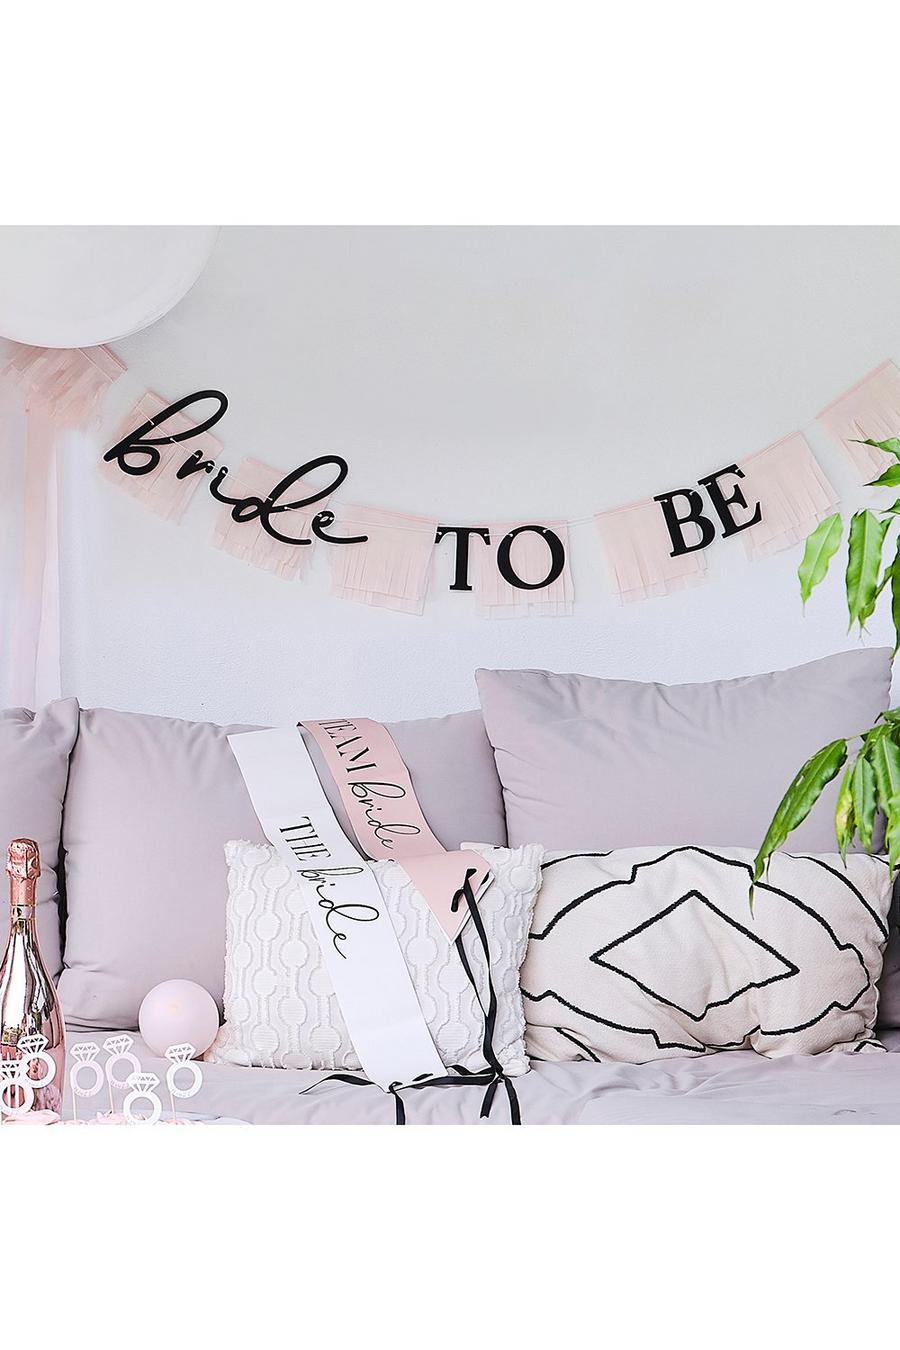 Ginger Ray Tassel Bride To Be Banner, Nude